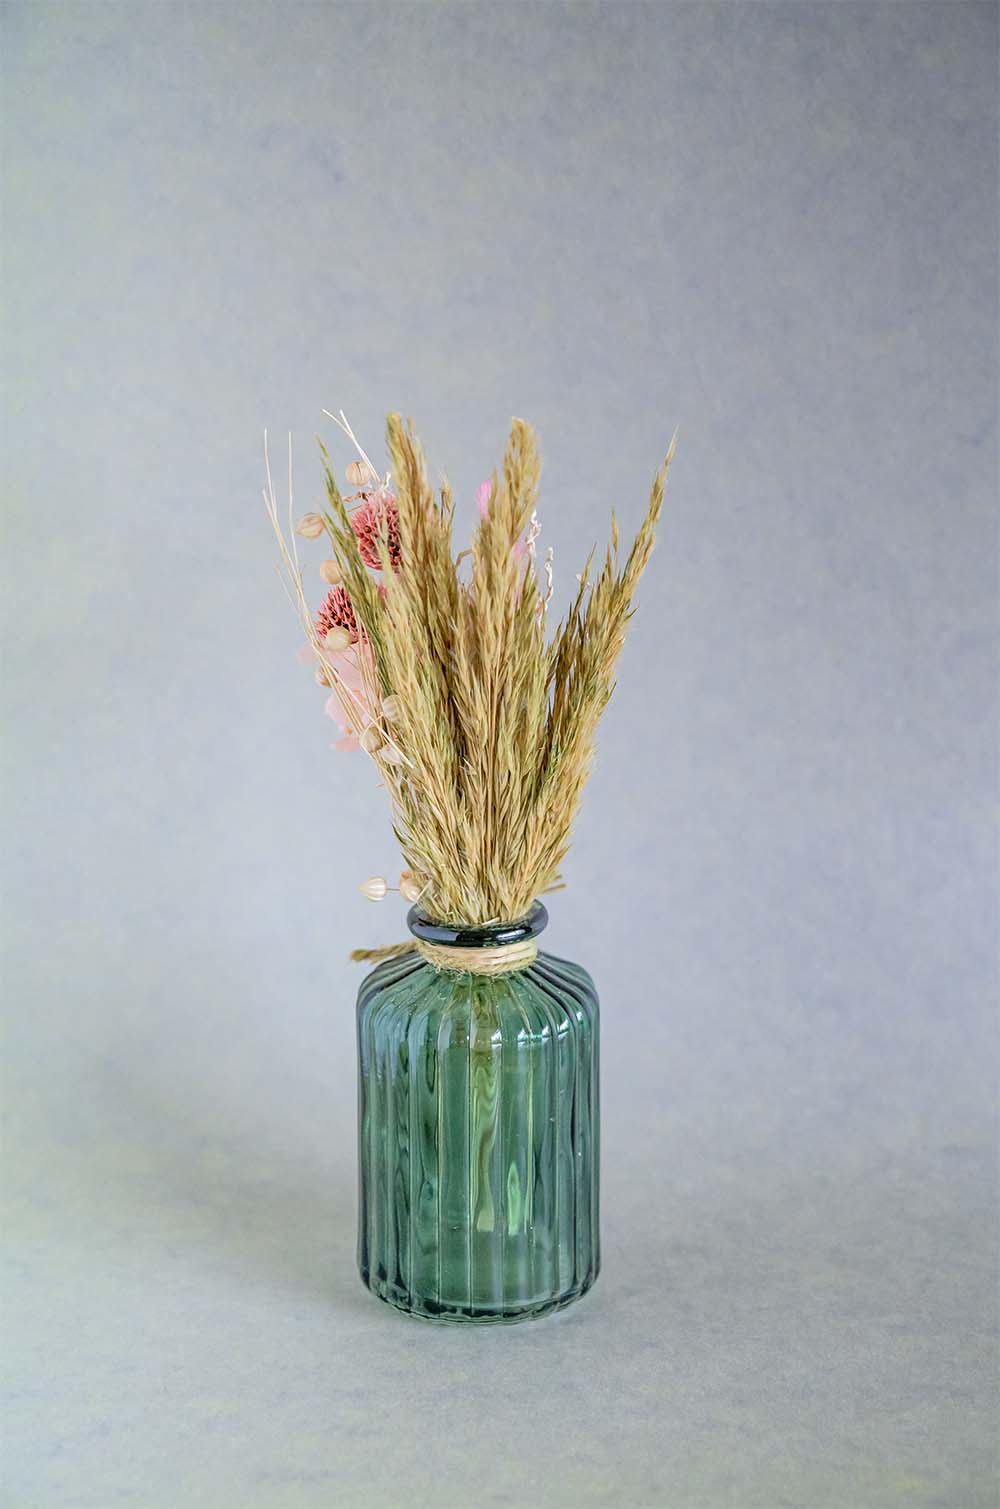 Wildflowers Natural Dried Flowers Bouquet in Glass Jar